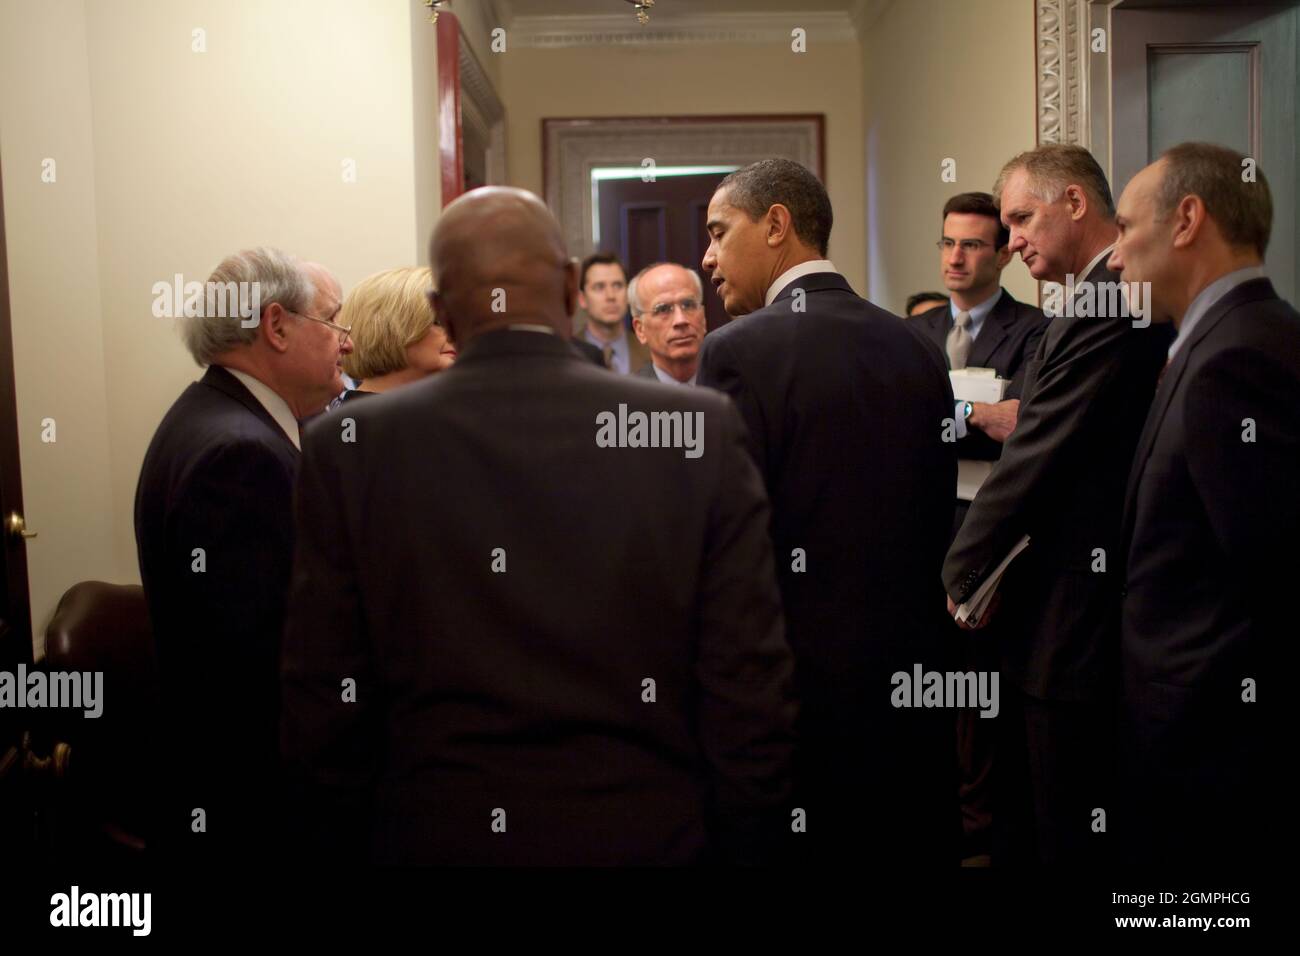 Prior to making a statement about reforming government defense contracts , President Obama is surrounded by participants, including Senator Carl Levin (D-MI), Rep. Peter Welch (D-VT), Sen. Claire McCaskill (D-MO),  Senator John McCain (R-AZ),  Rep. Edolphus Towns (D-NY), and OMB Director Peter Orszag, National Security Advisor Gen. James Jones and Phil Schiliro, Special Assistant to the President for Legislative Affairs. 3/4/09Official White House Photo by Pete Souza Stock Photo